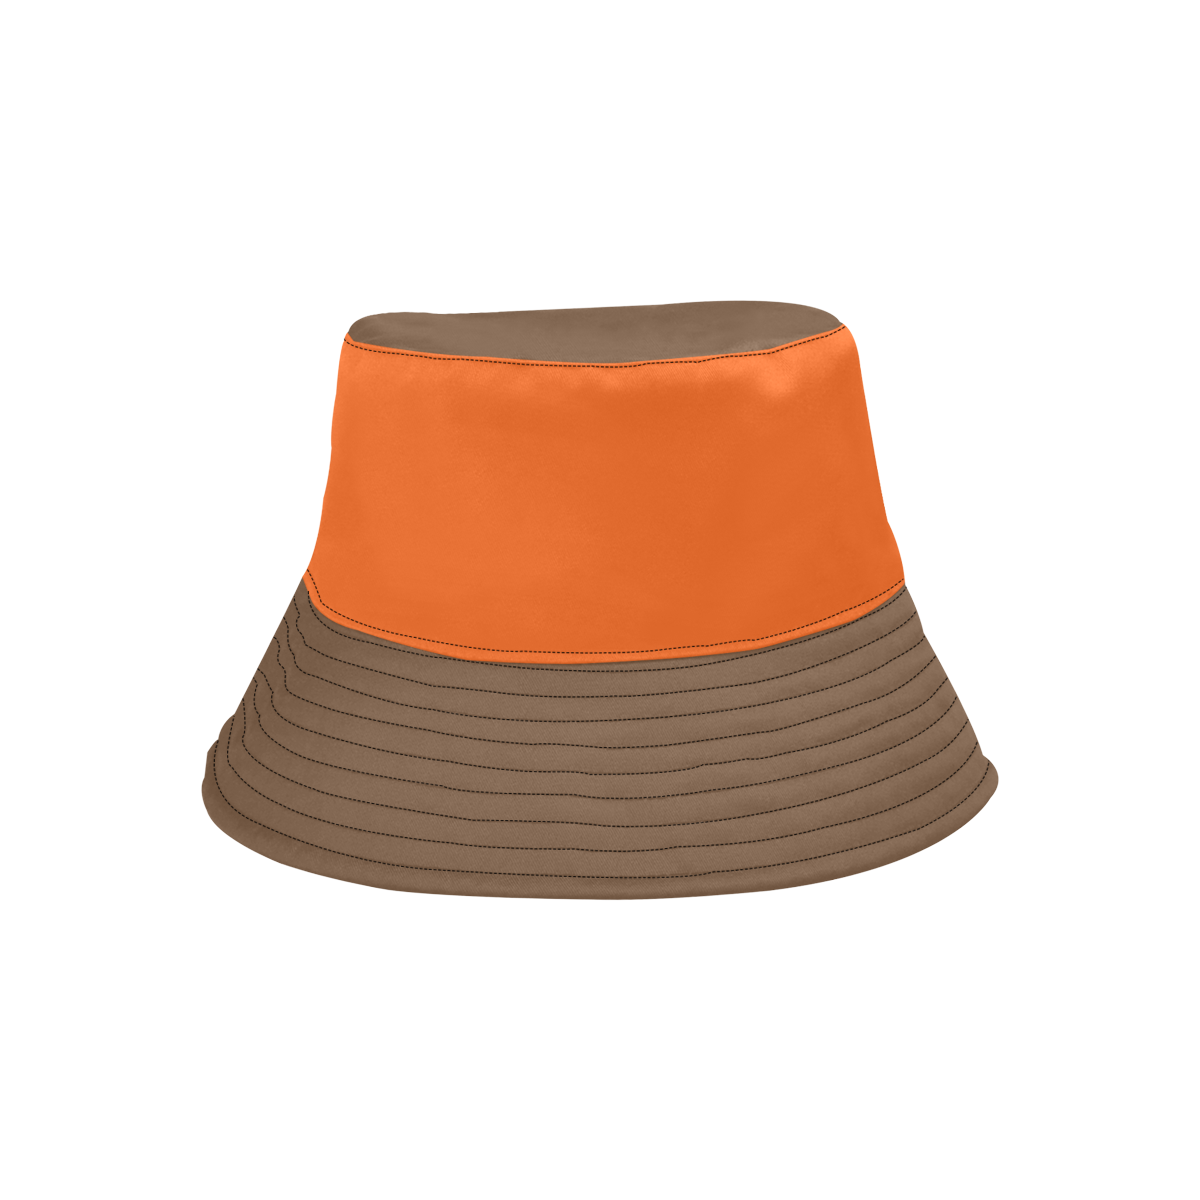 solid colors brown and orange All Over Print Bucket Hat